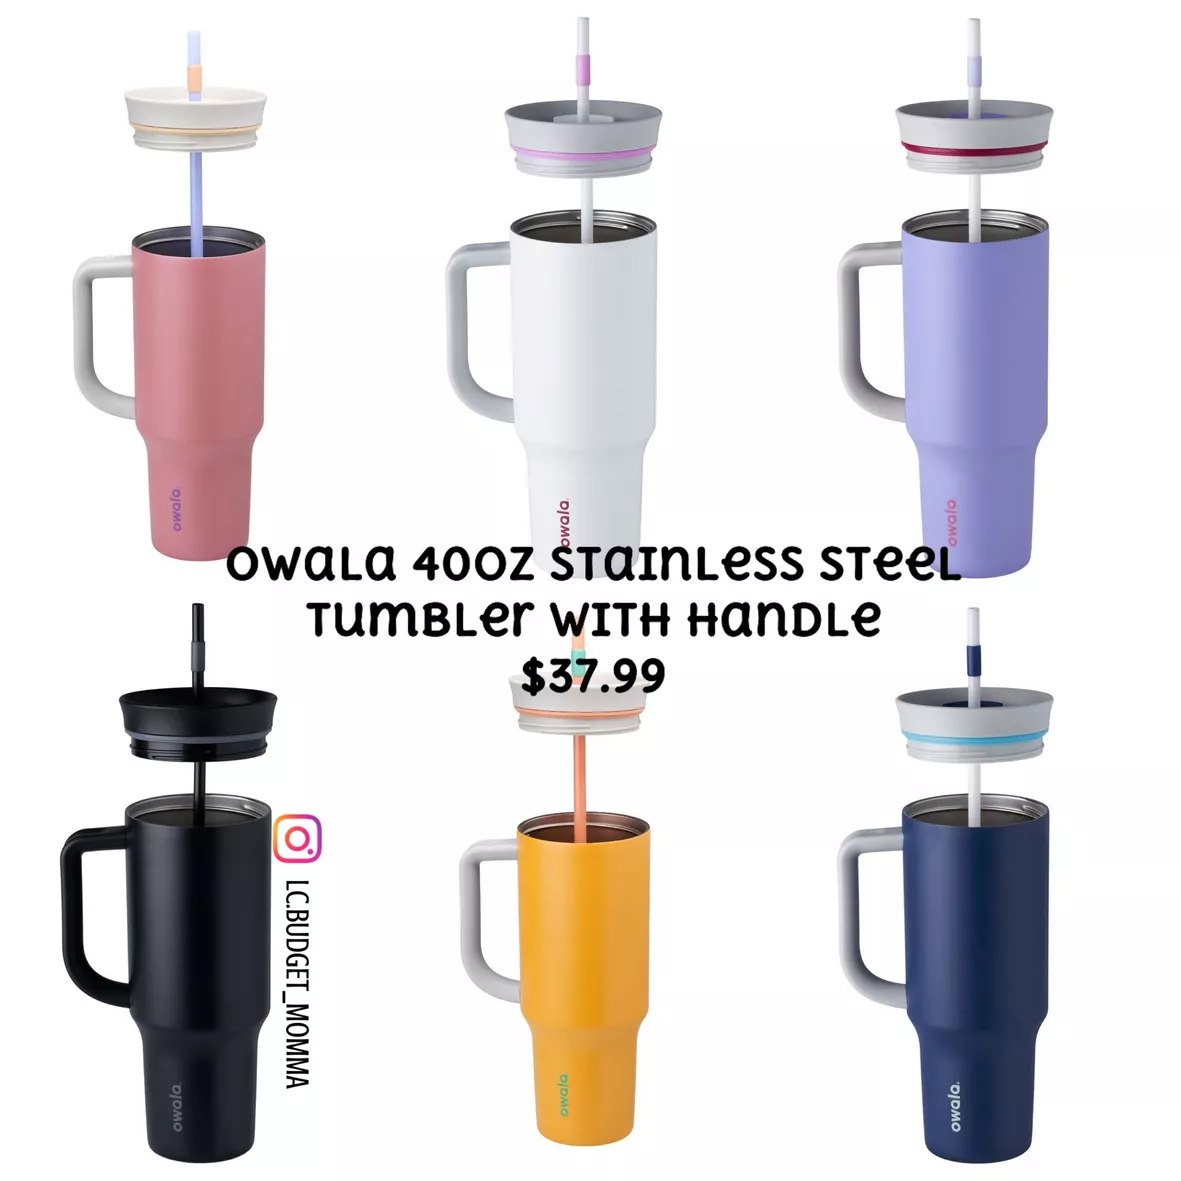 Owala 40oz Stainless Steel Tumbler With Handle : Target